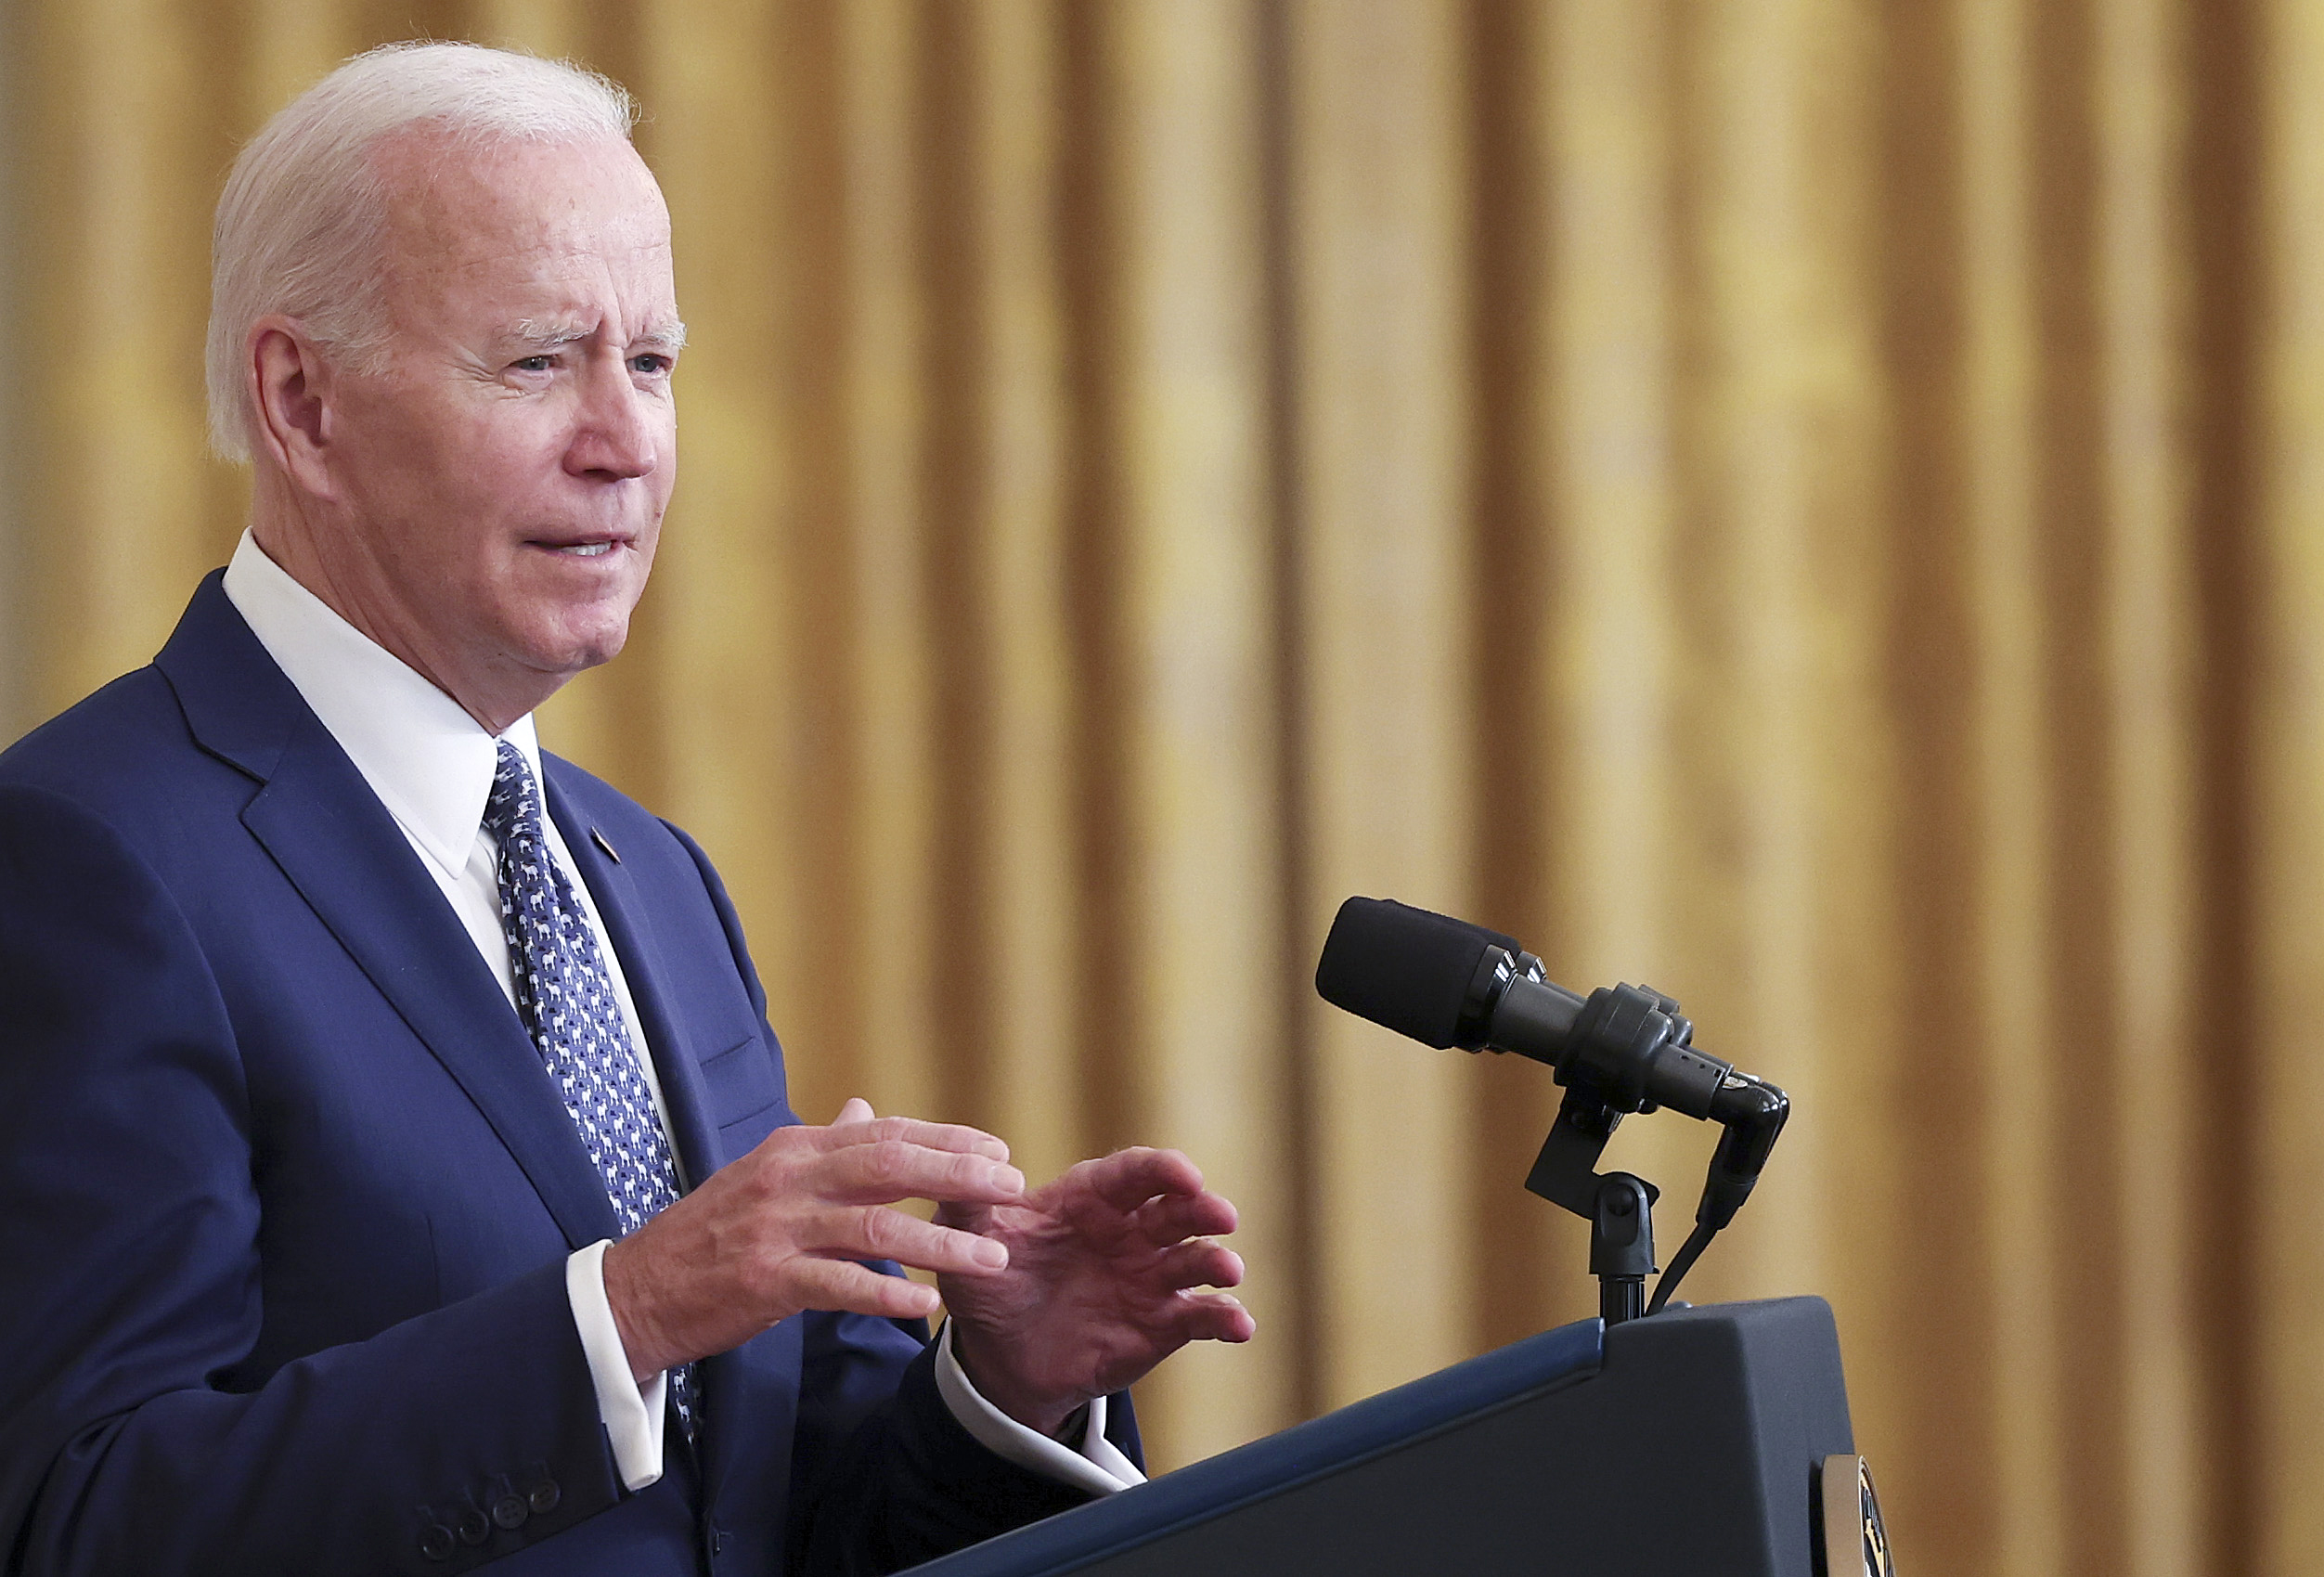 PHOTO: President Joe Biden delivers remarks in the East Room of the White House, June 13, 2022, in Washington, DC.